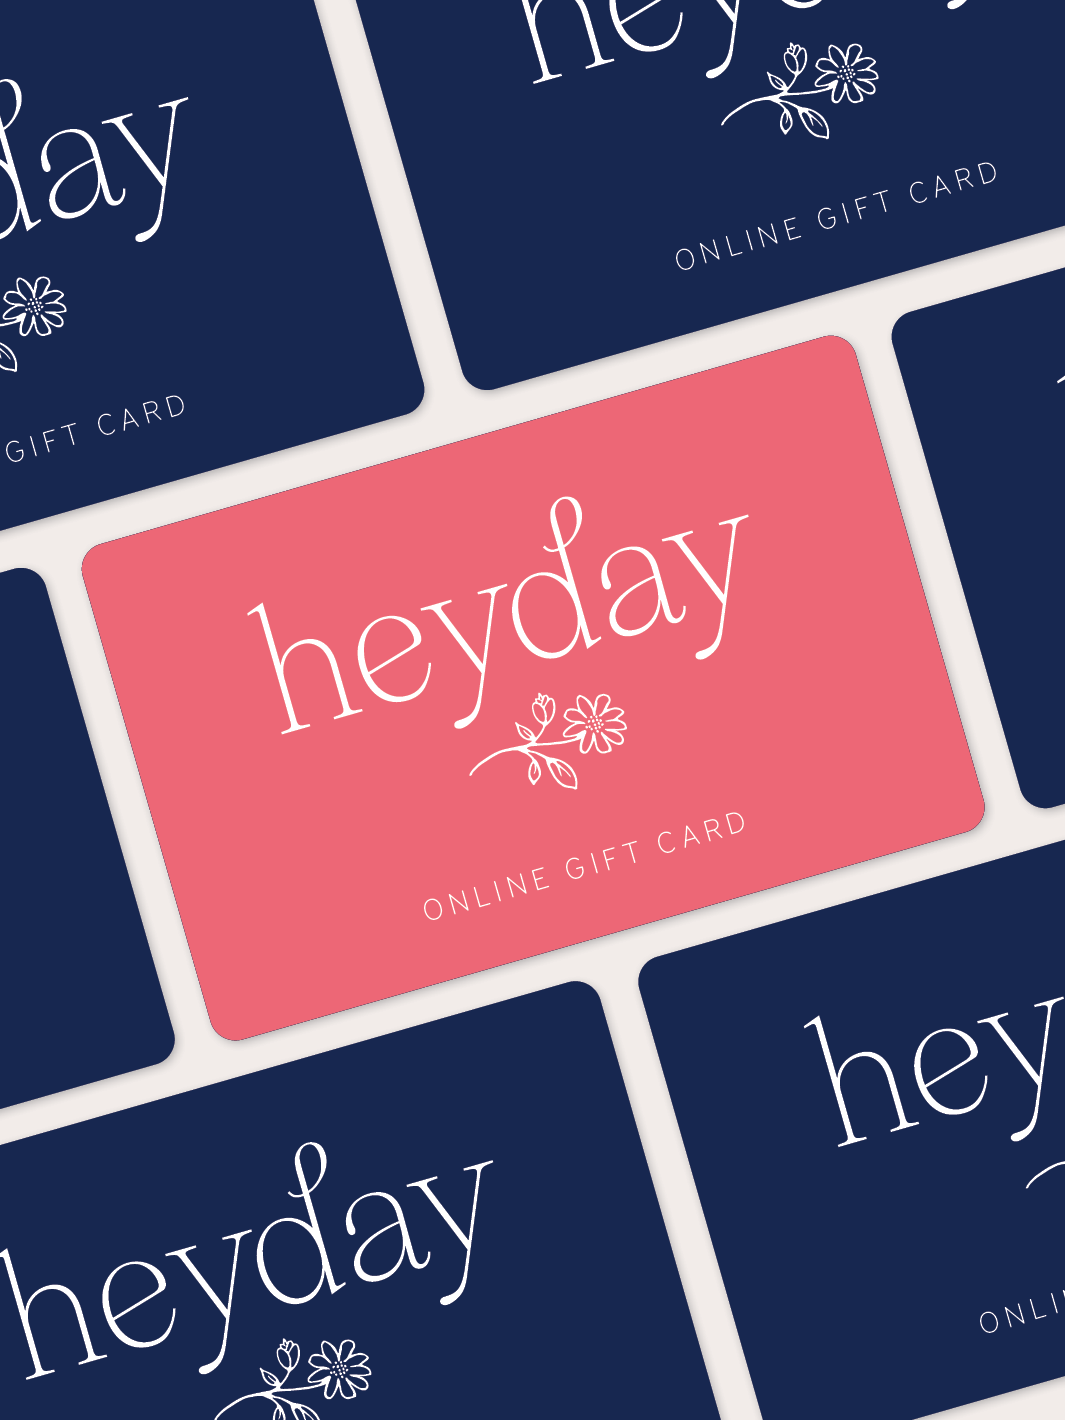 Heyday *Online Only* Gift Card - Heyday